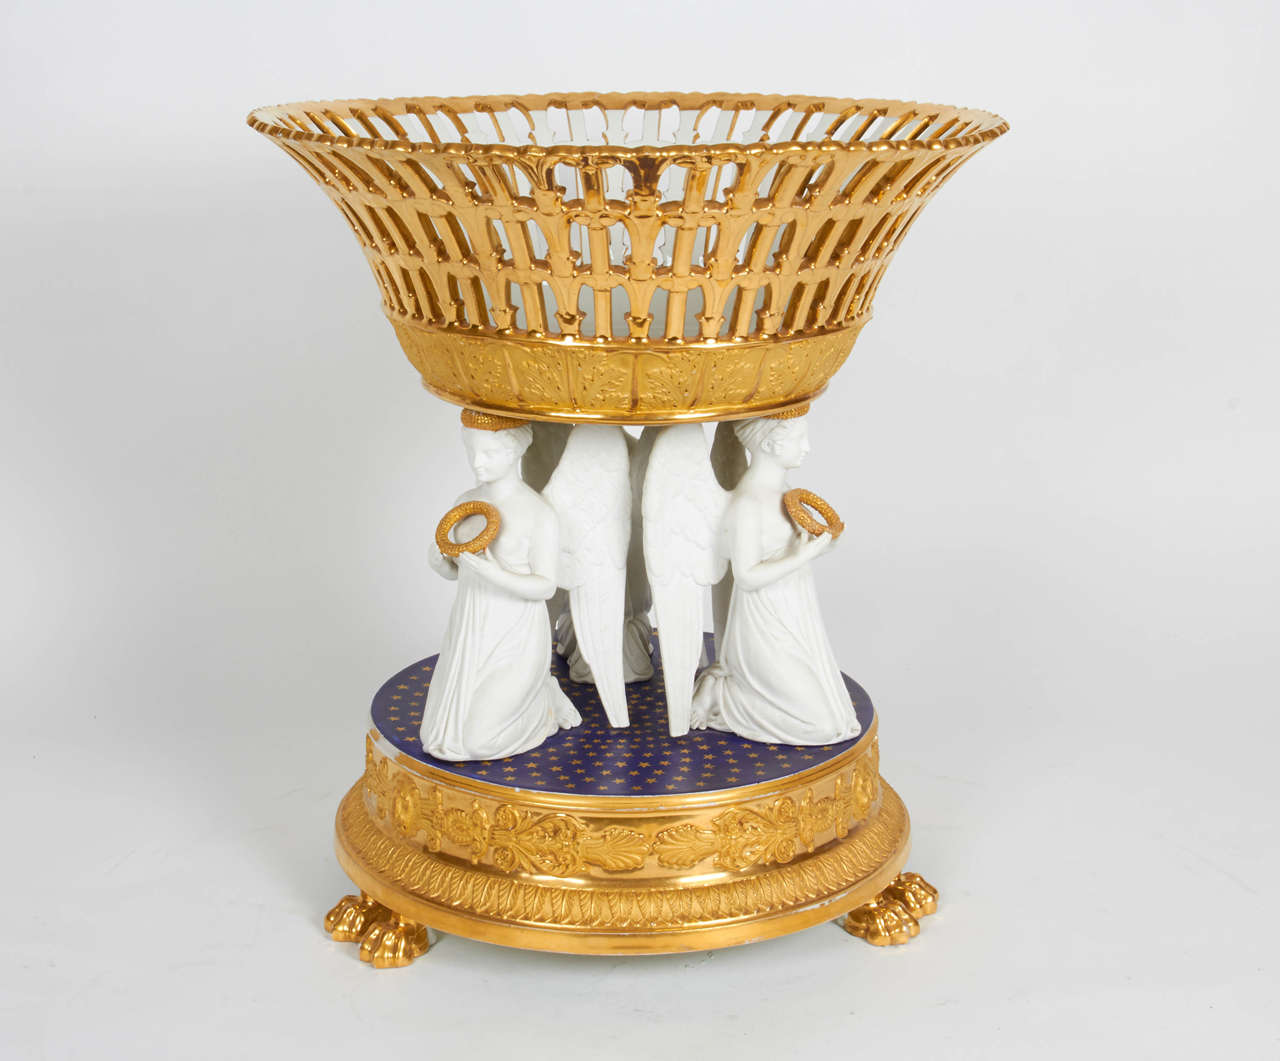 A magnificent and large Russian Empire porcelain gold ground and white bisque figural reticulated centrepiece. A large filigree basket supported by three addorsed kneeling winged female figures, beautifully hand chiselled and detailed, all seated on